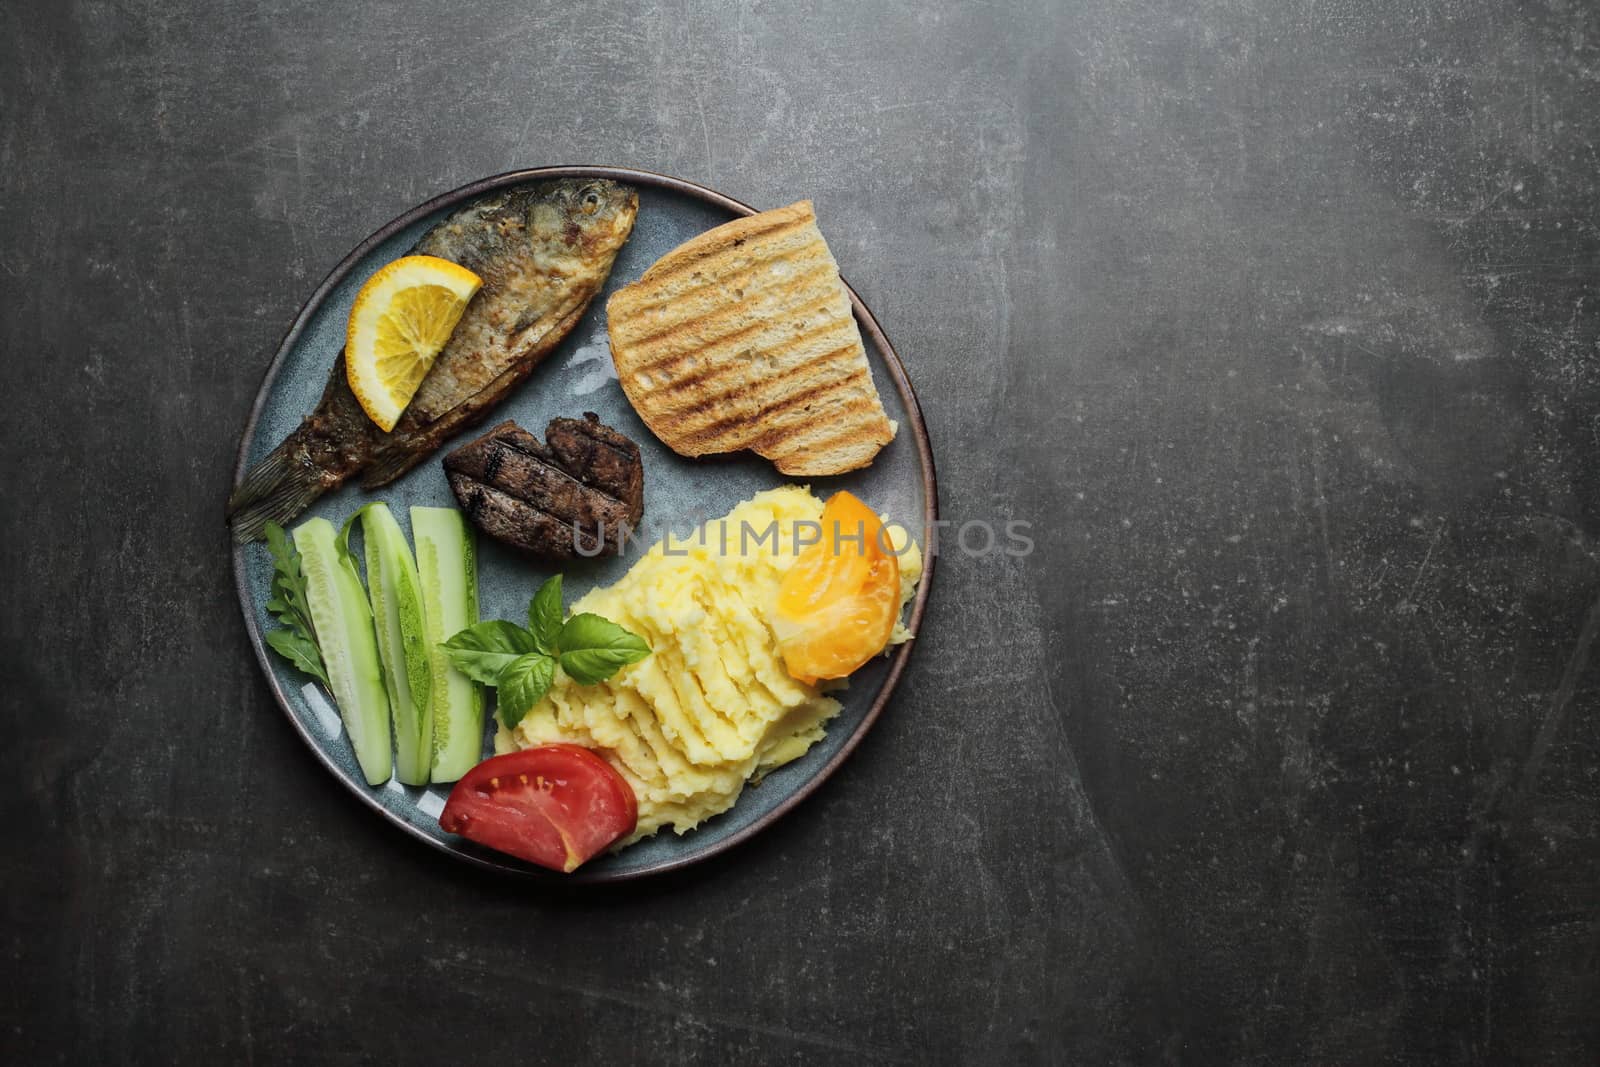 Fried fish, meat steak and vegetables on a plate. Concrete gray countertop by selinsmo